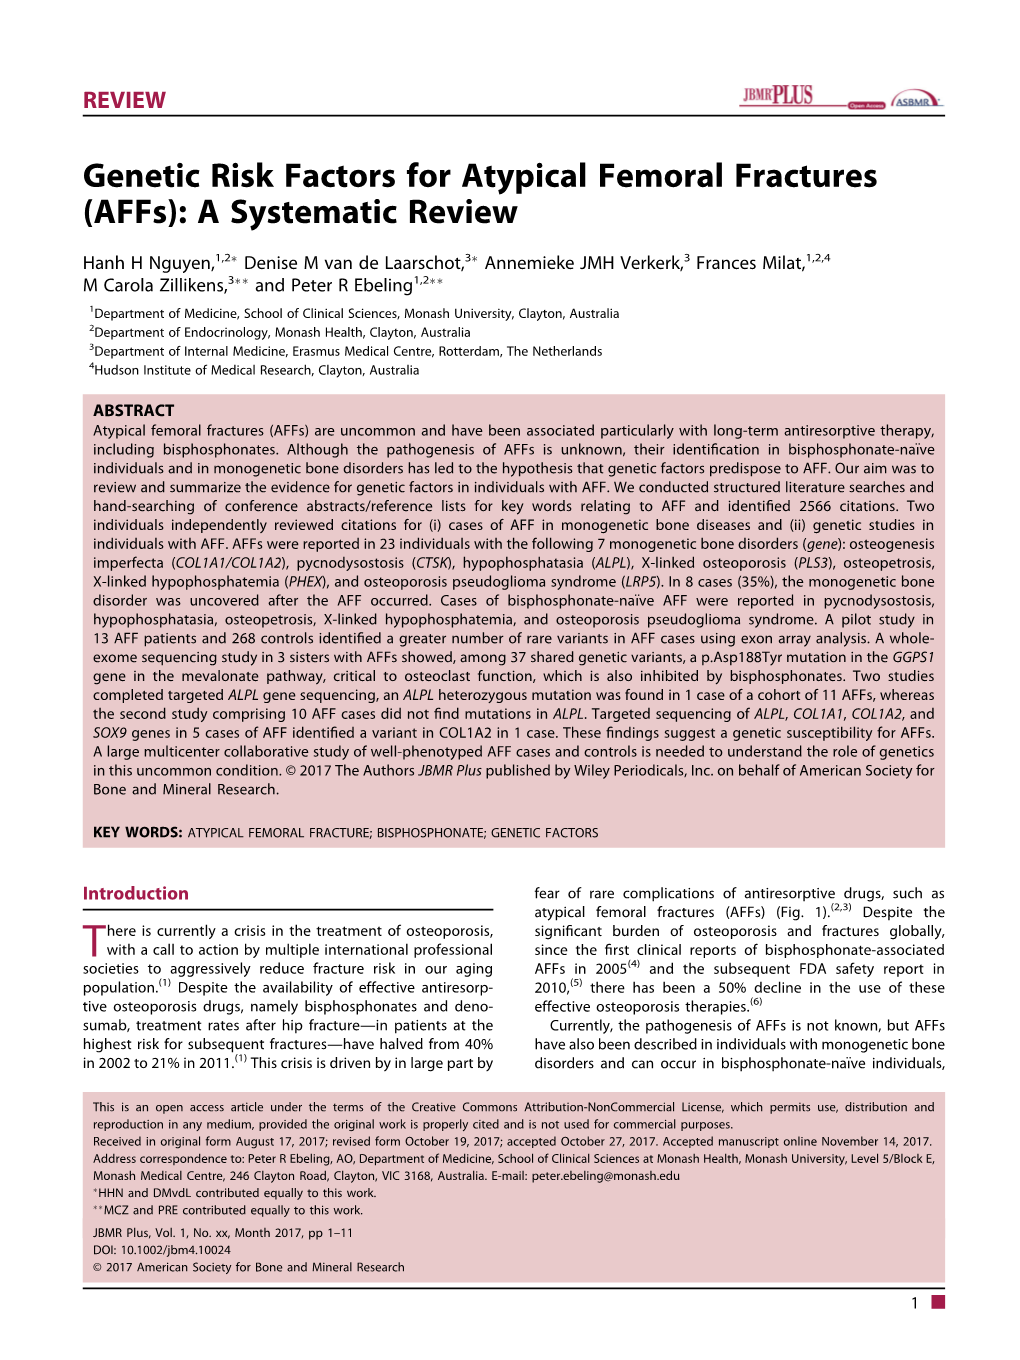 Genetic Risk Factors for Atypical Femoral Fractures (Affs): a Systematic Review